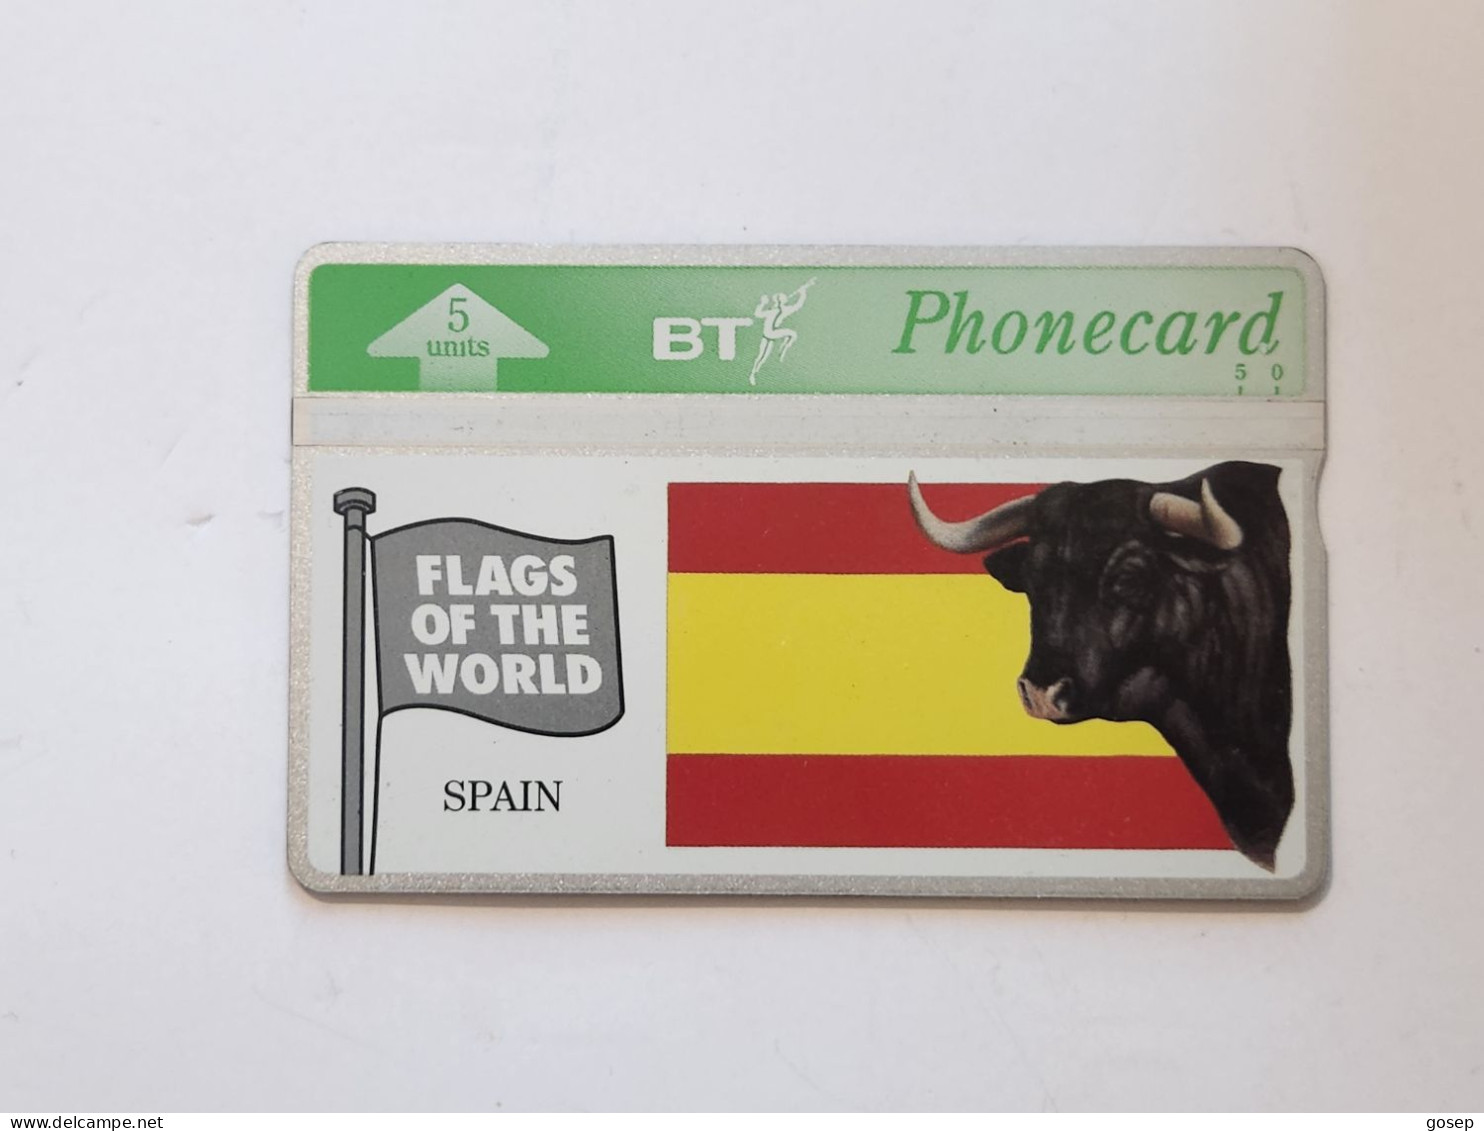 United Kingdom-(BTG-333)-Flags Of The World-(2)-(305)(5units)(407A02293)(tirage-1.000)-price Cataloge-4.00£-mint - BT General Issues